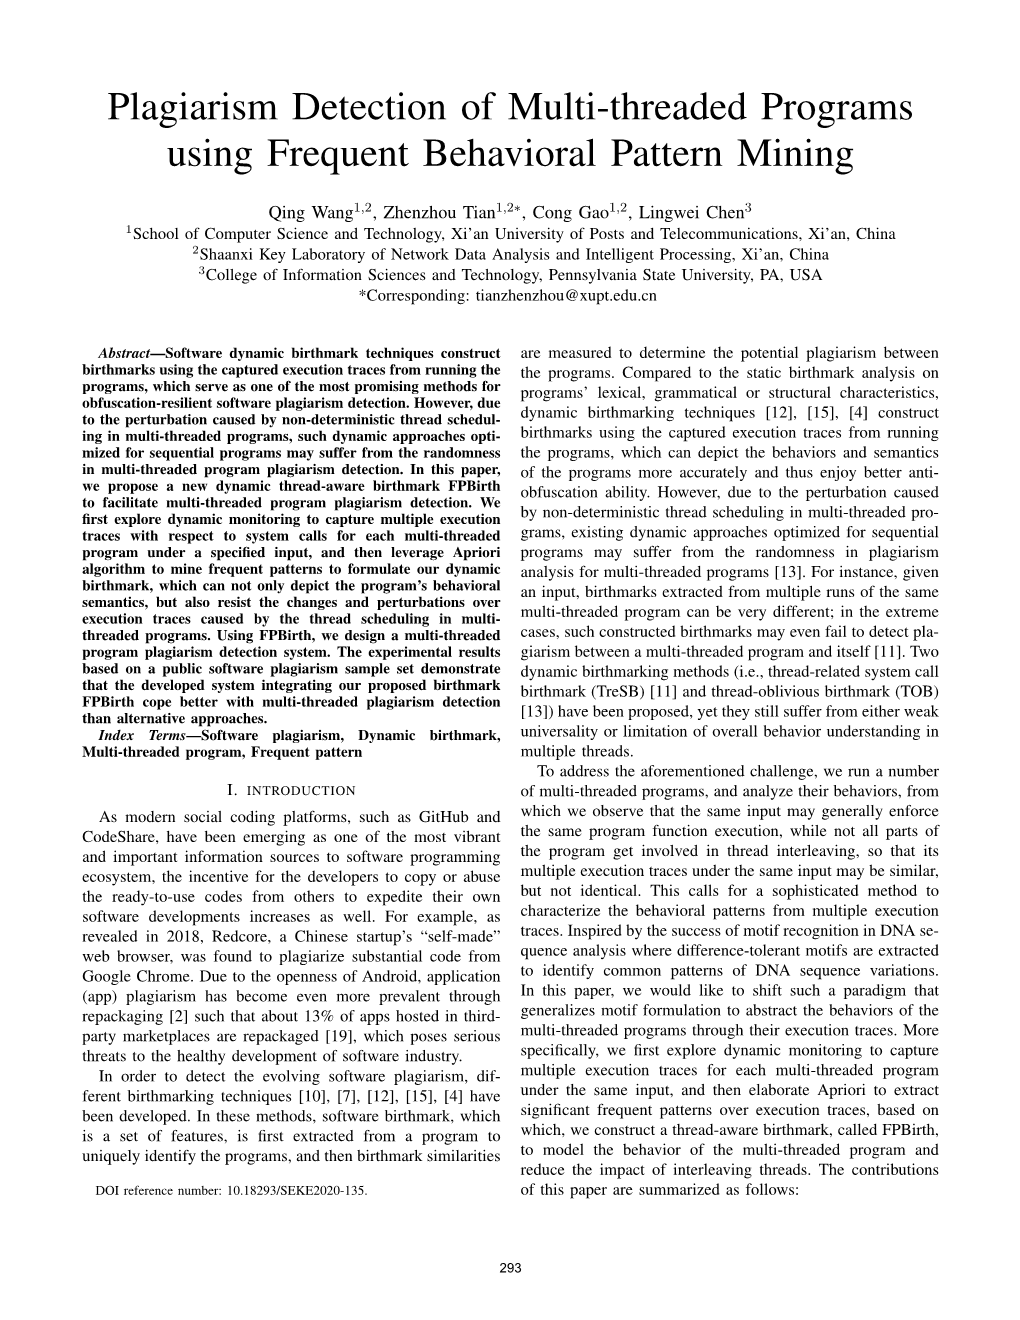 Plagiarism Detection of Multi-Threaded Programs Using Frequent Behavioral Pattern Mining